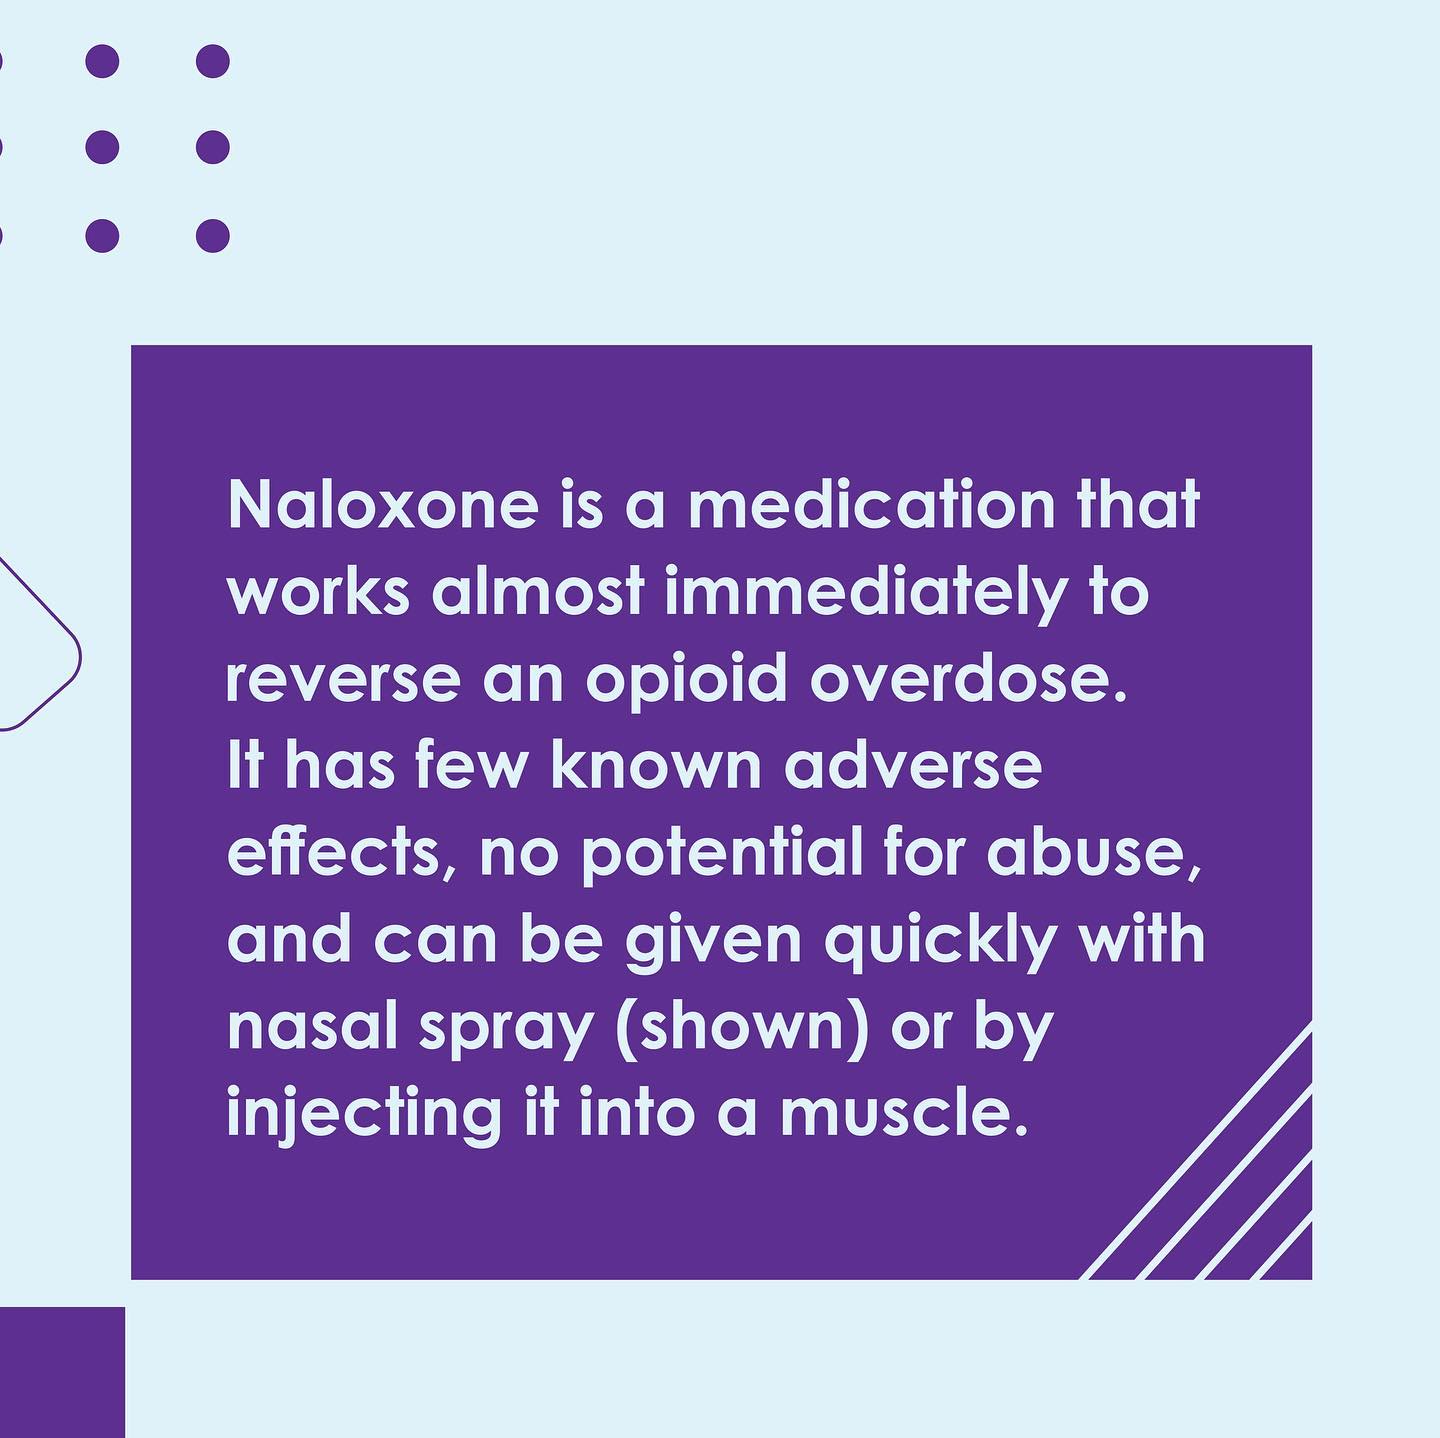 Naloxone is a medication that works almost immediately to reverse an opioid overdose